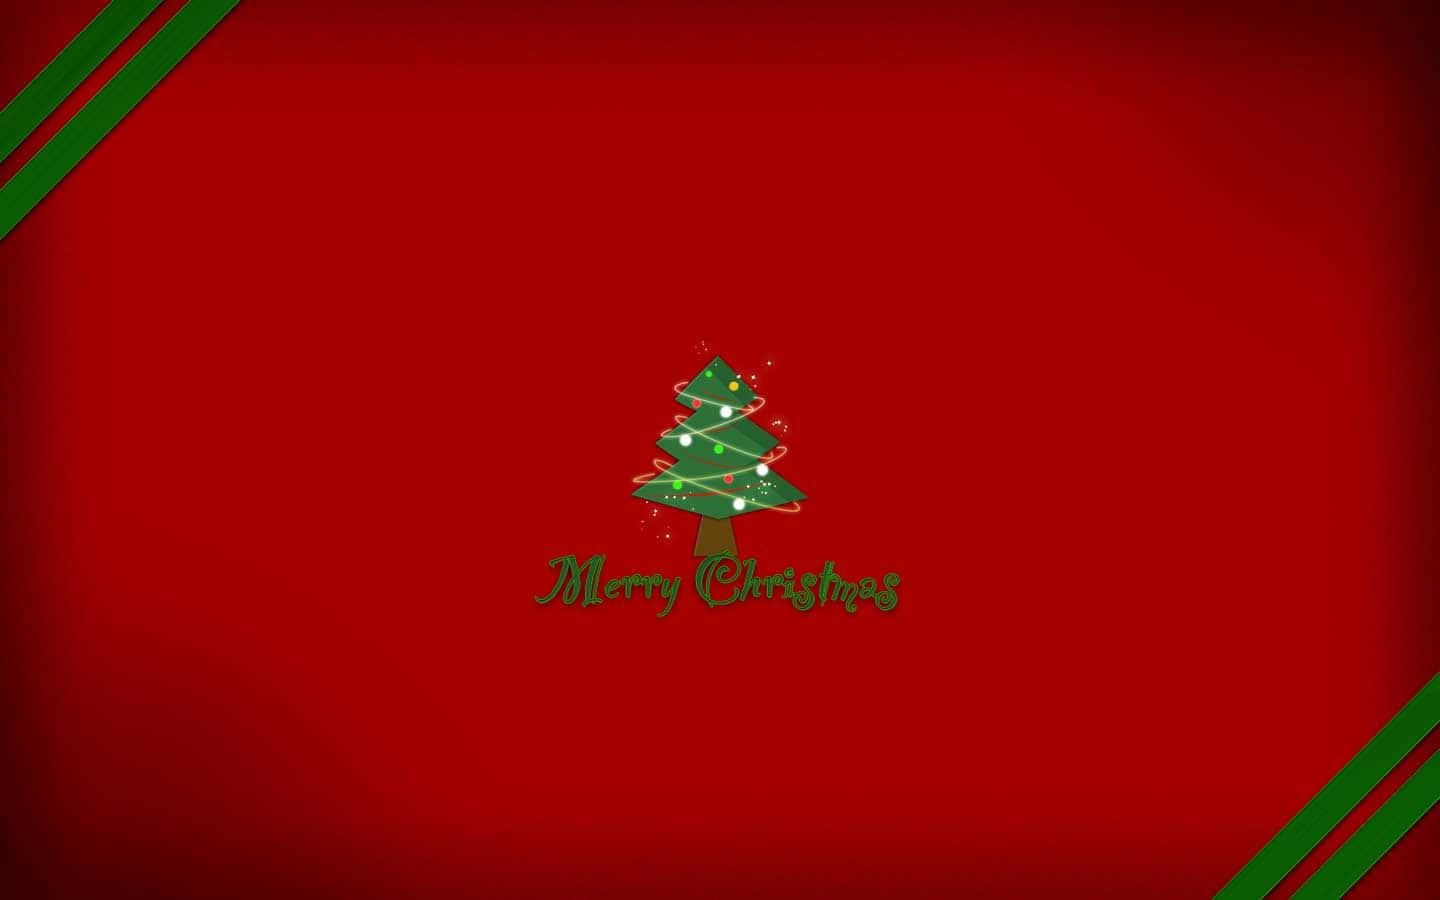 "Festive Moments with Red and Green Christmas Decorations" Wallpaper